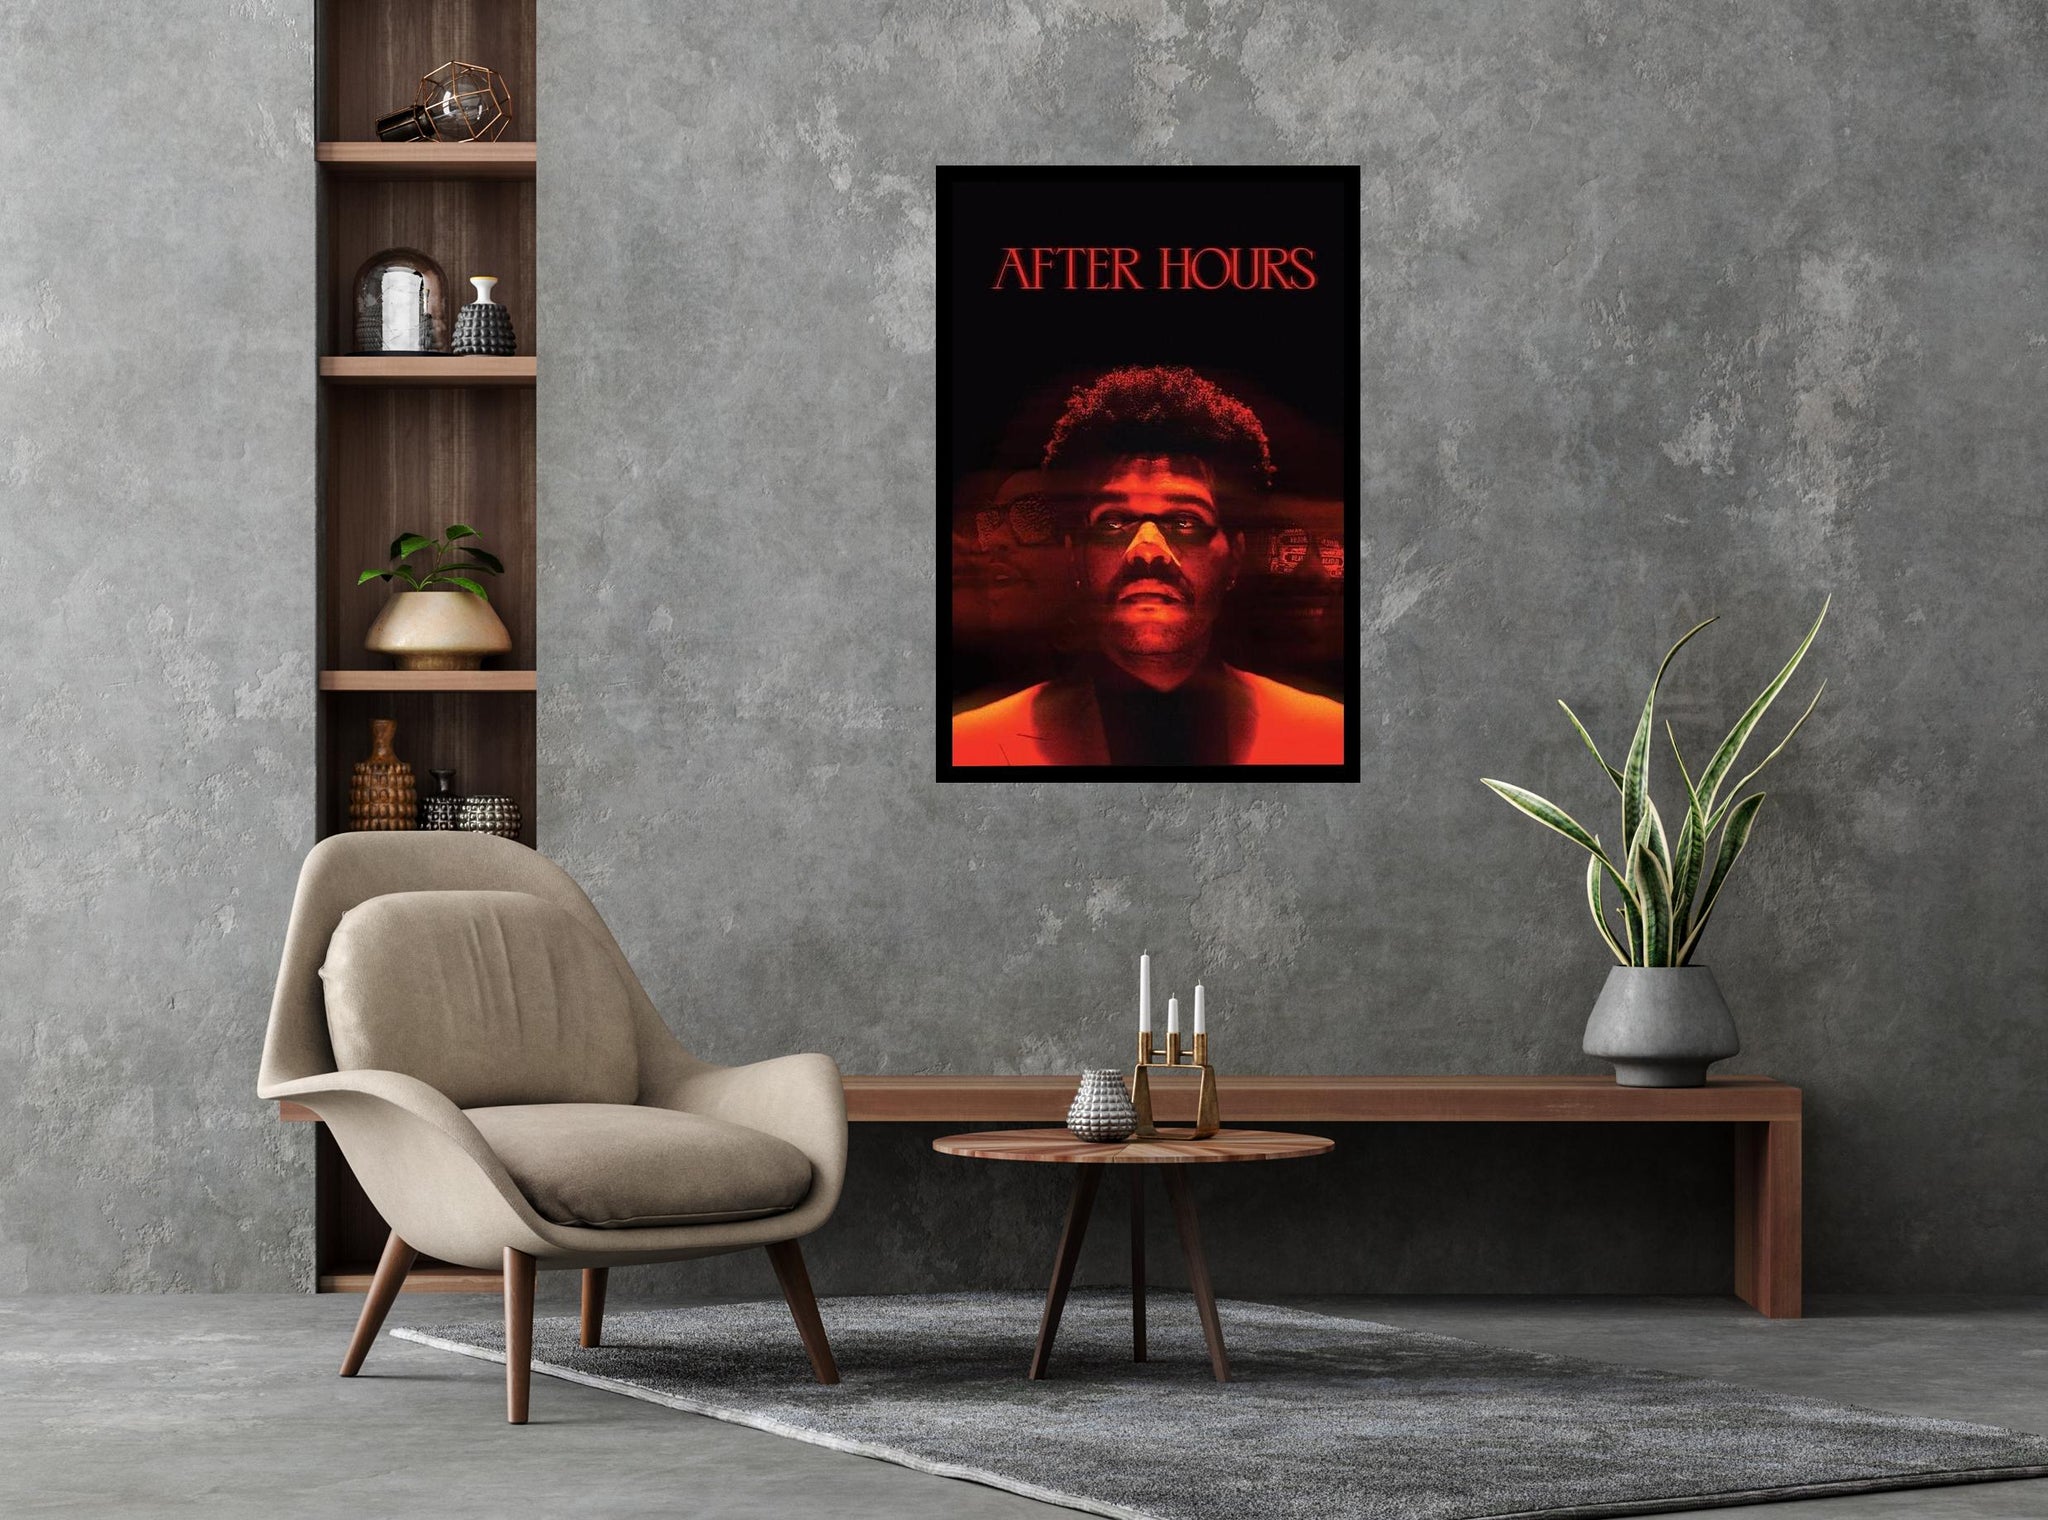 The Weeknd Music Poster, The Weeknd Lyric poster, Xo Poster, heartless  poster, weeknd poster, hip hop poster, The weeknd wall art, afterhours,  posters for home and office-08 Fine Art Print - Pop